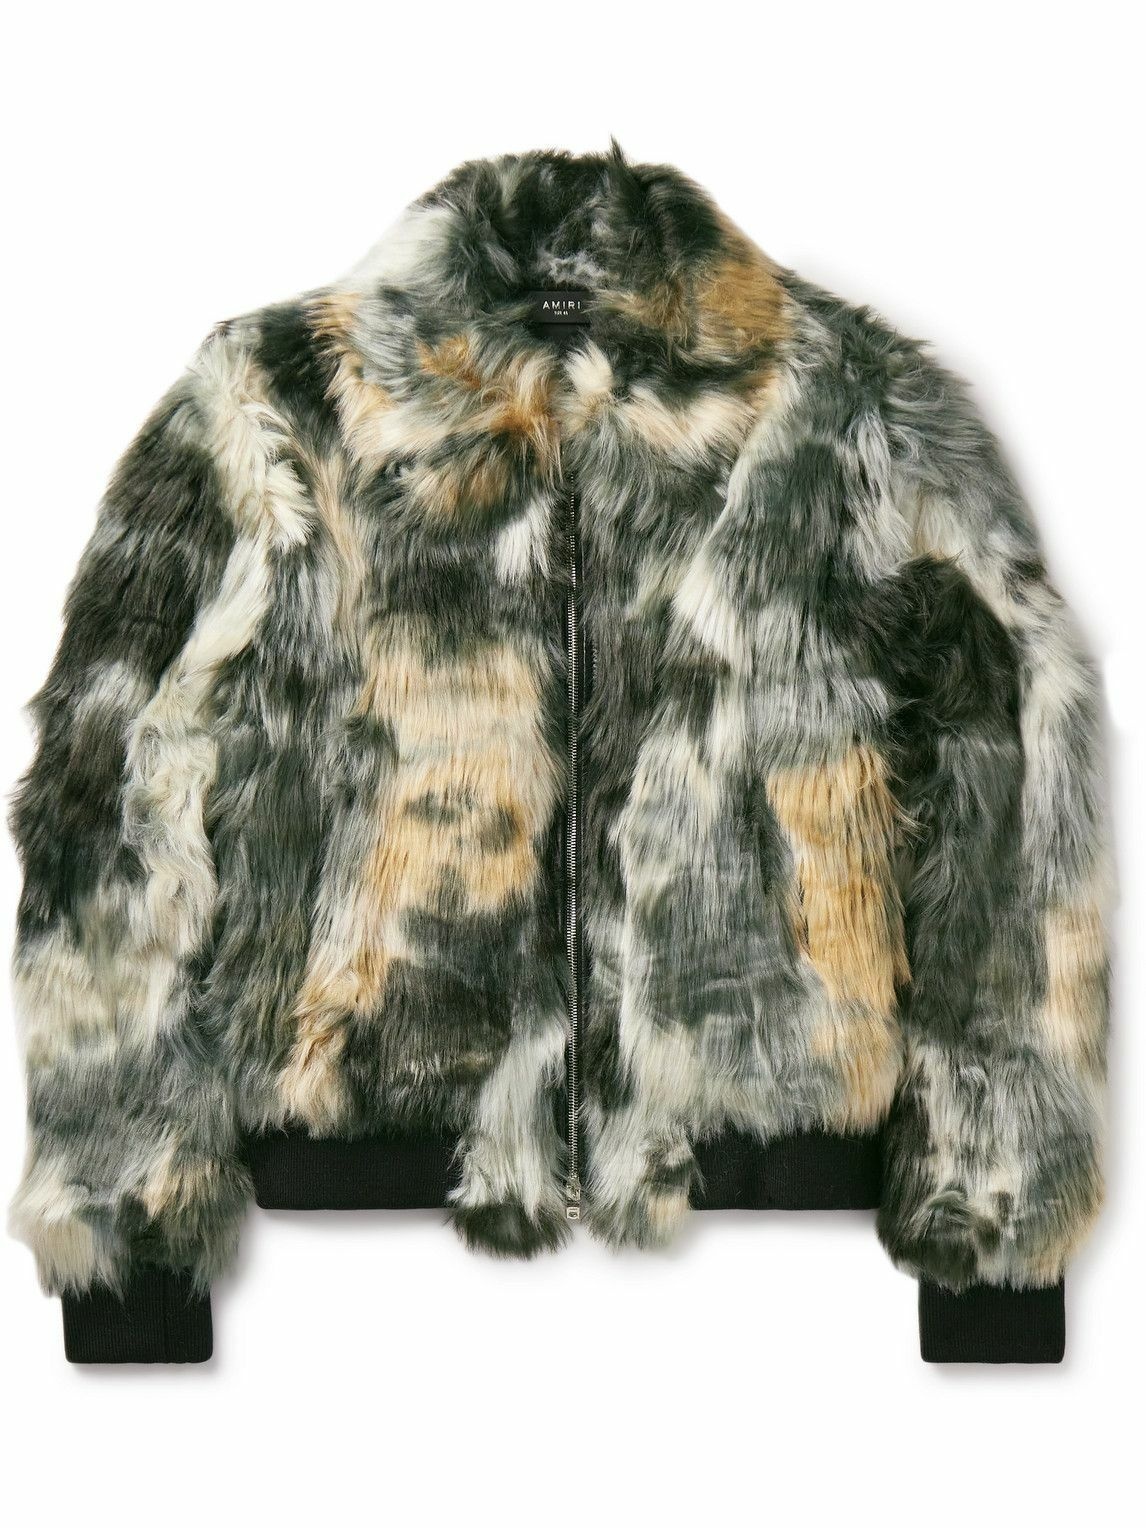 AMIRI - Leather-Trimmed Tie-Dyed Faux Fur Bomber Jacket - Green Amiri